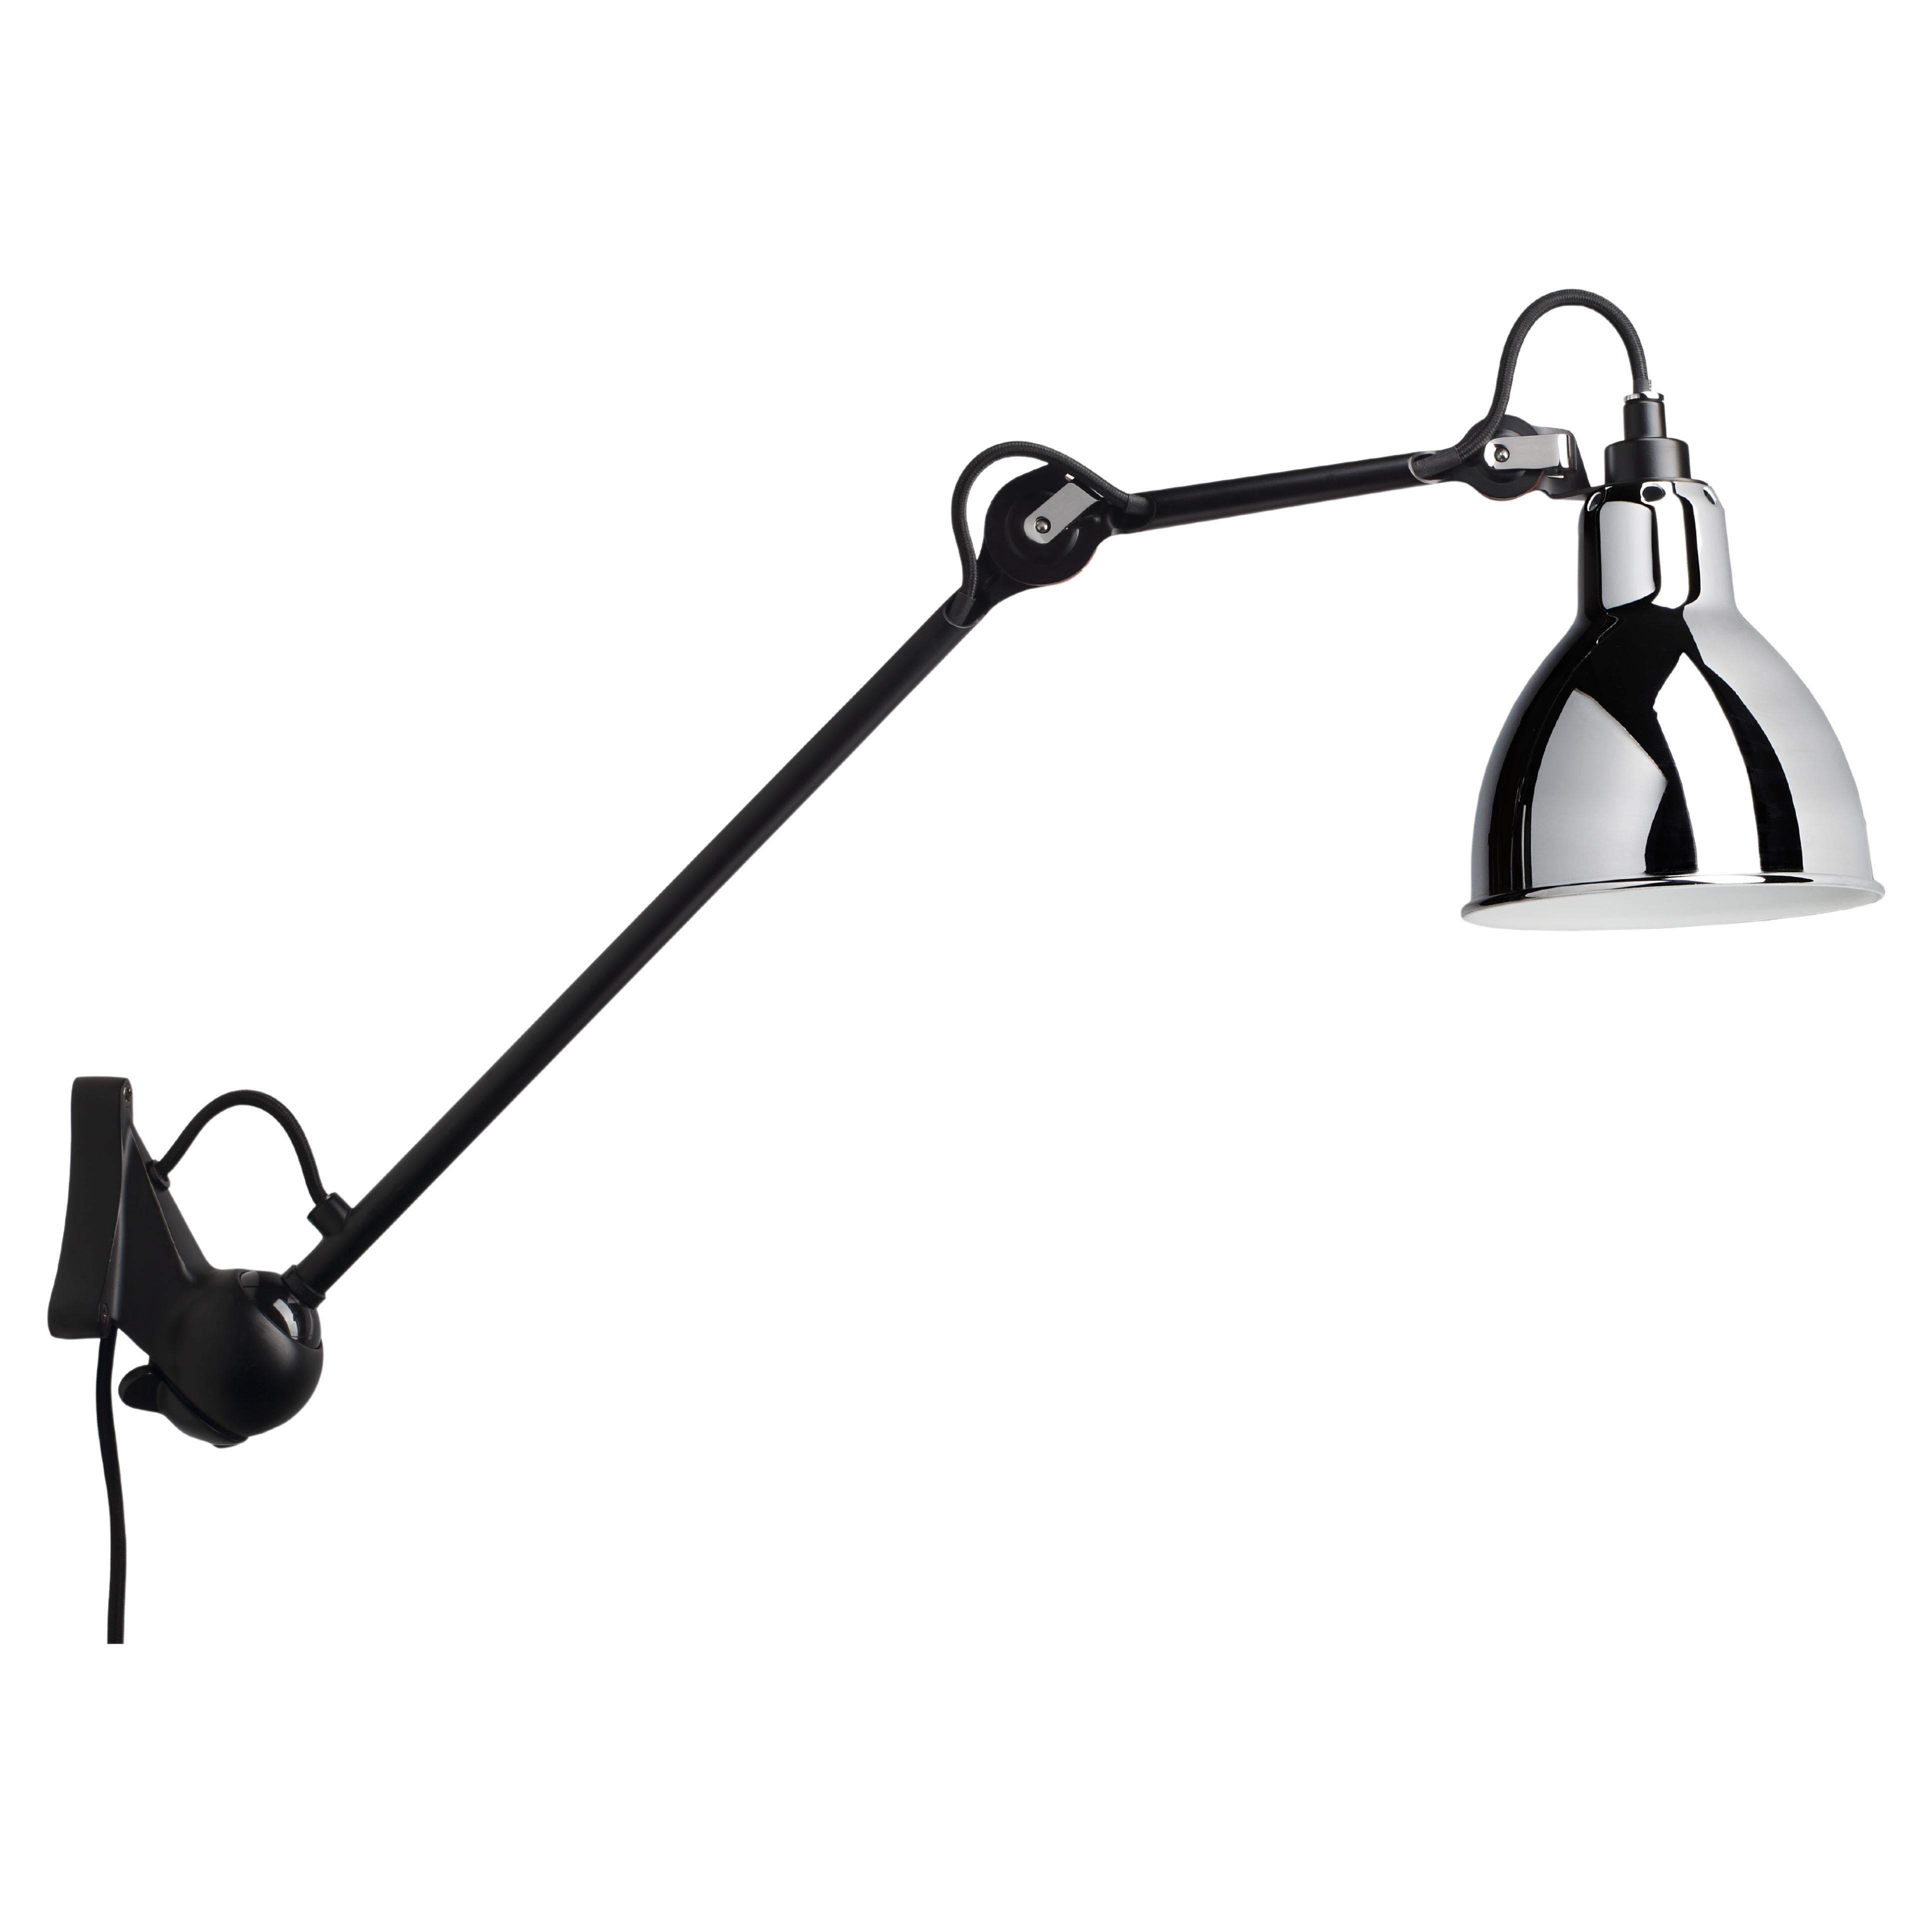 DCW Editions La Lampe Gras N°222 Wall Lamp in Black Arm and Chrome Shade For Sale